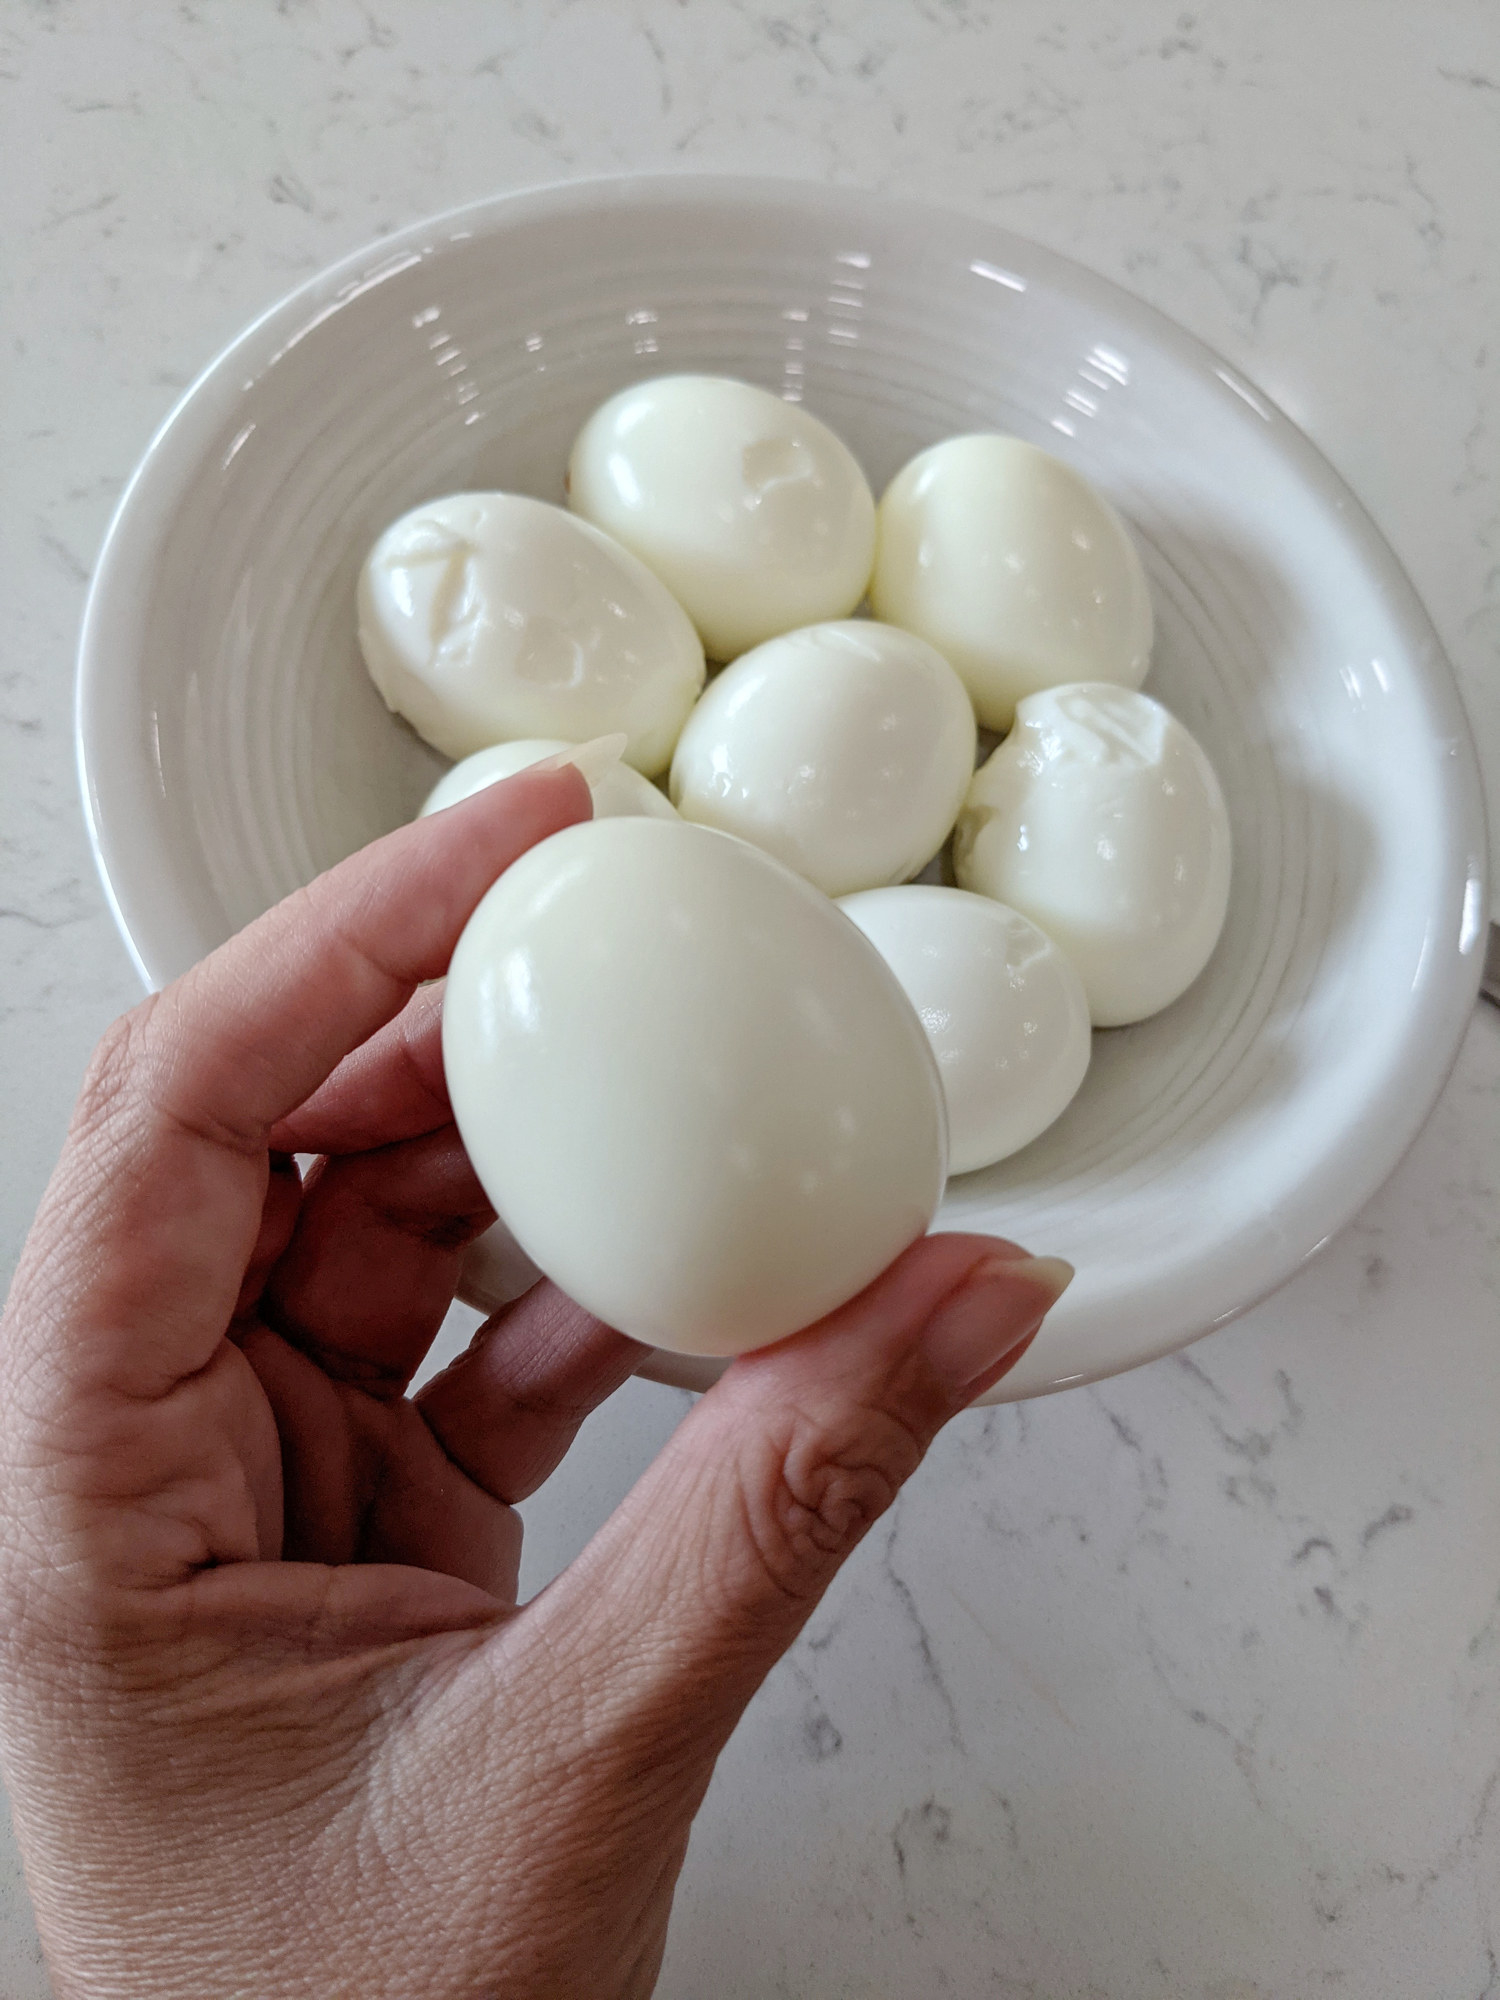 Woman&#x27;s hand holding a peeled Hard-boiled egg in front of bowl of eggs.